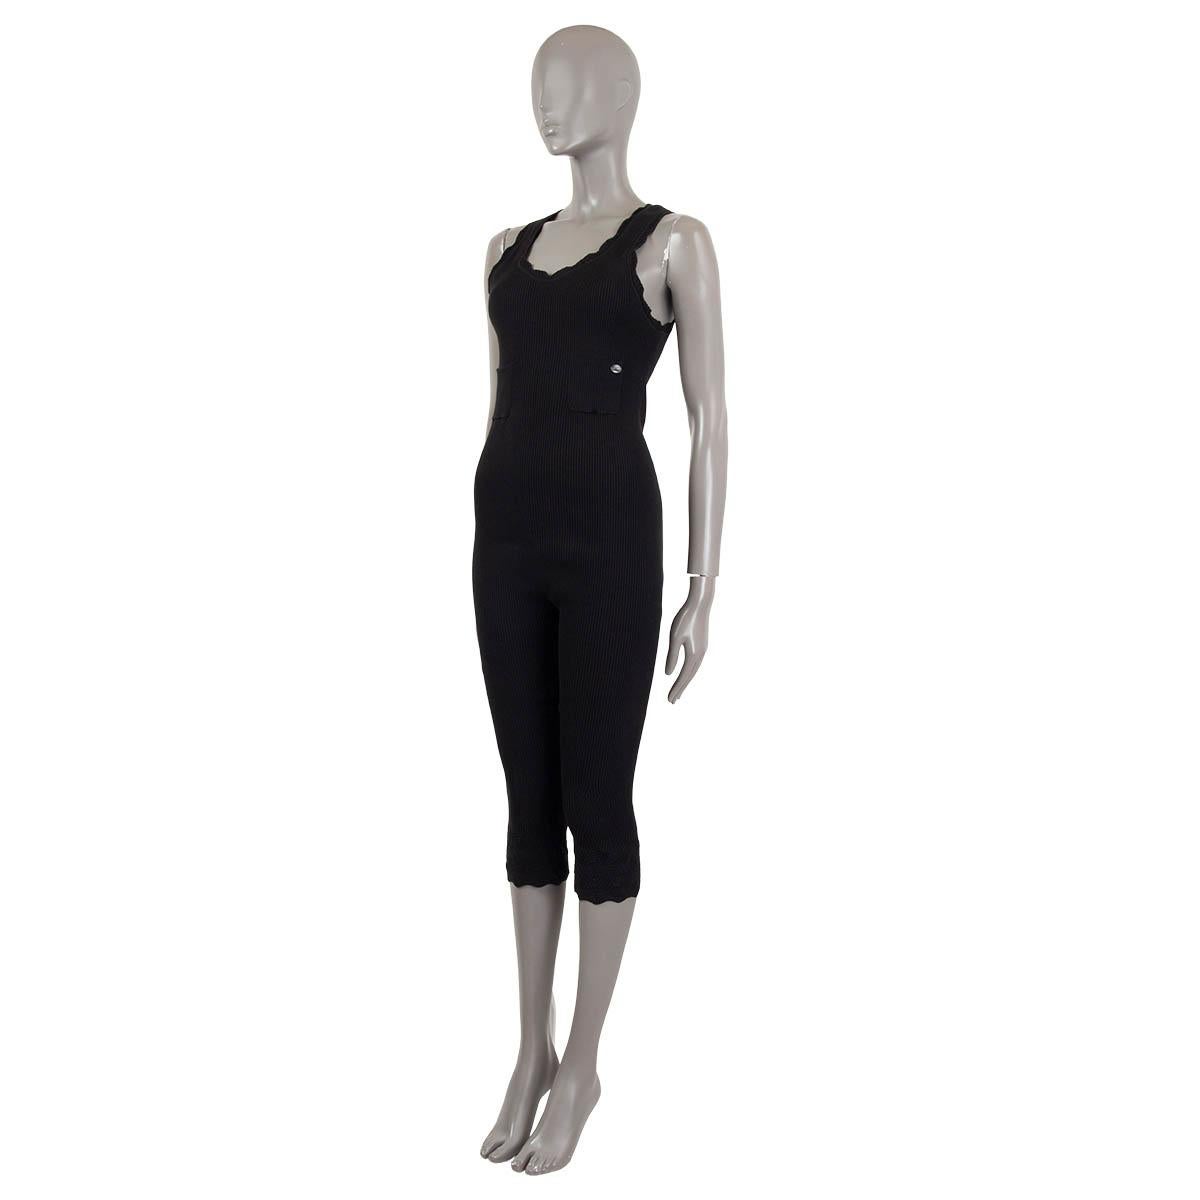 100% authentic Chanel sleeveless rib-knit bodycon jumpsuit in black cotton (100%) featuring two chest patch pockets. Opens with a zipper in the back. Unlined. Has been worn and is in excellent condition.

2018